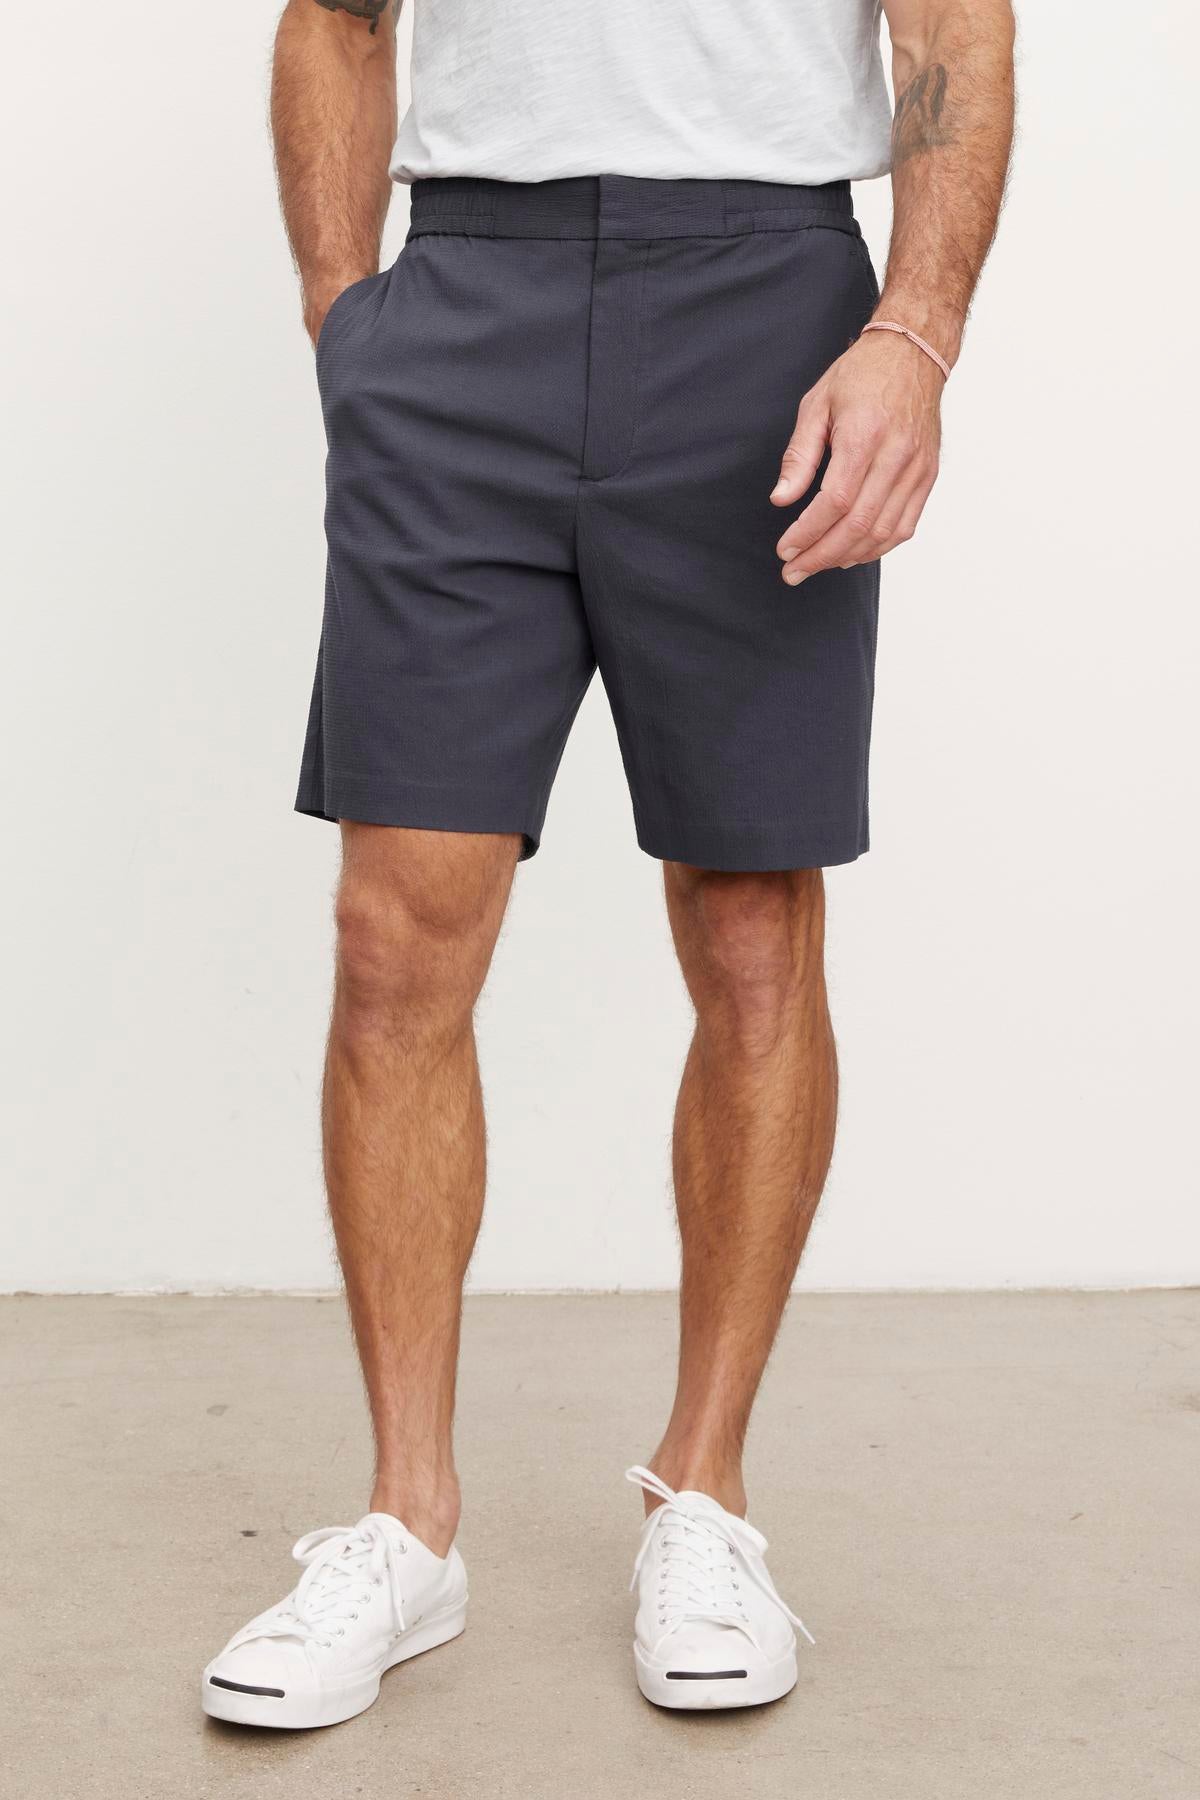 A frontal view of a man from the waist down, wearing Velvet by Graham & Spencer's DAMIAN SHORTS with slash pockets and white sneakers. He has his left hand partially in his pocket.-36890695925953